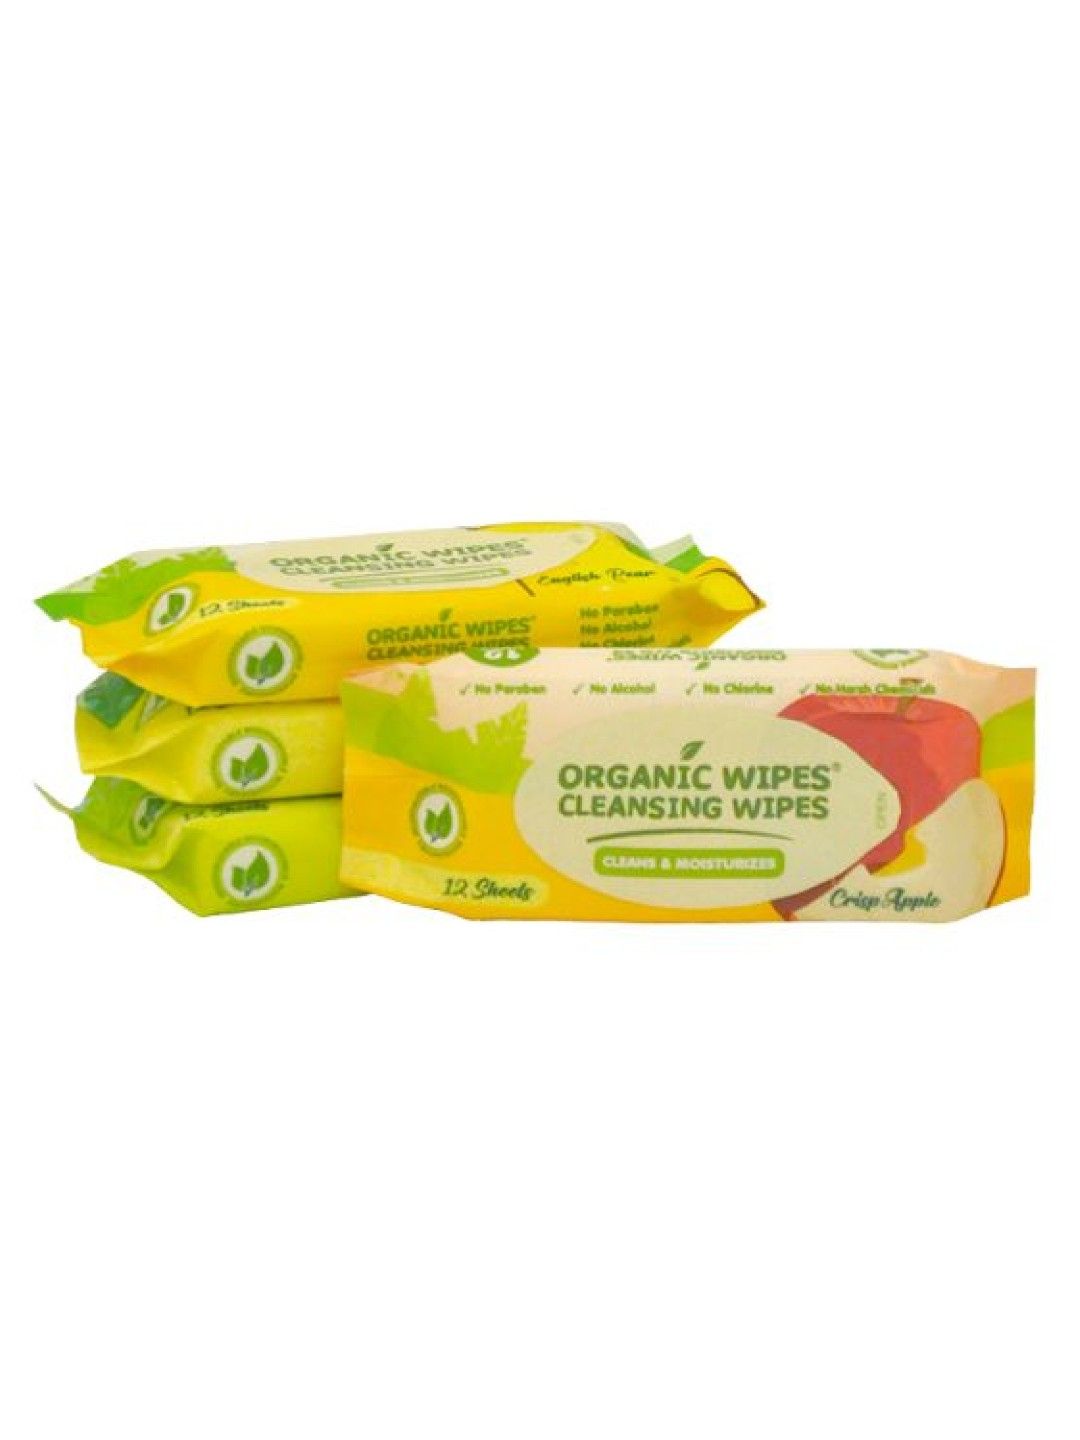 Organic Baby Wipes Organic Wipes Cleansing Wipes Assorted (12s x 4-pack)